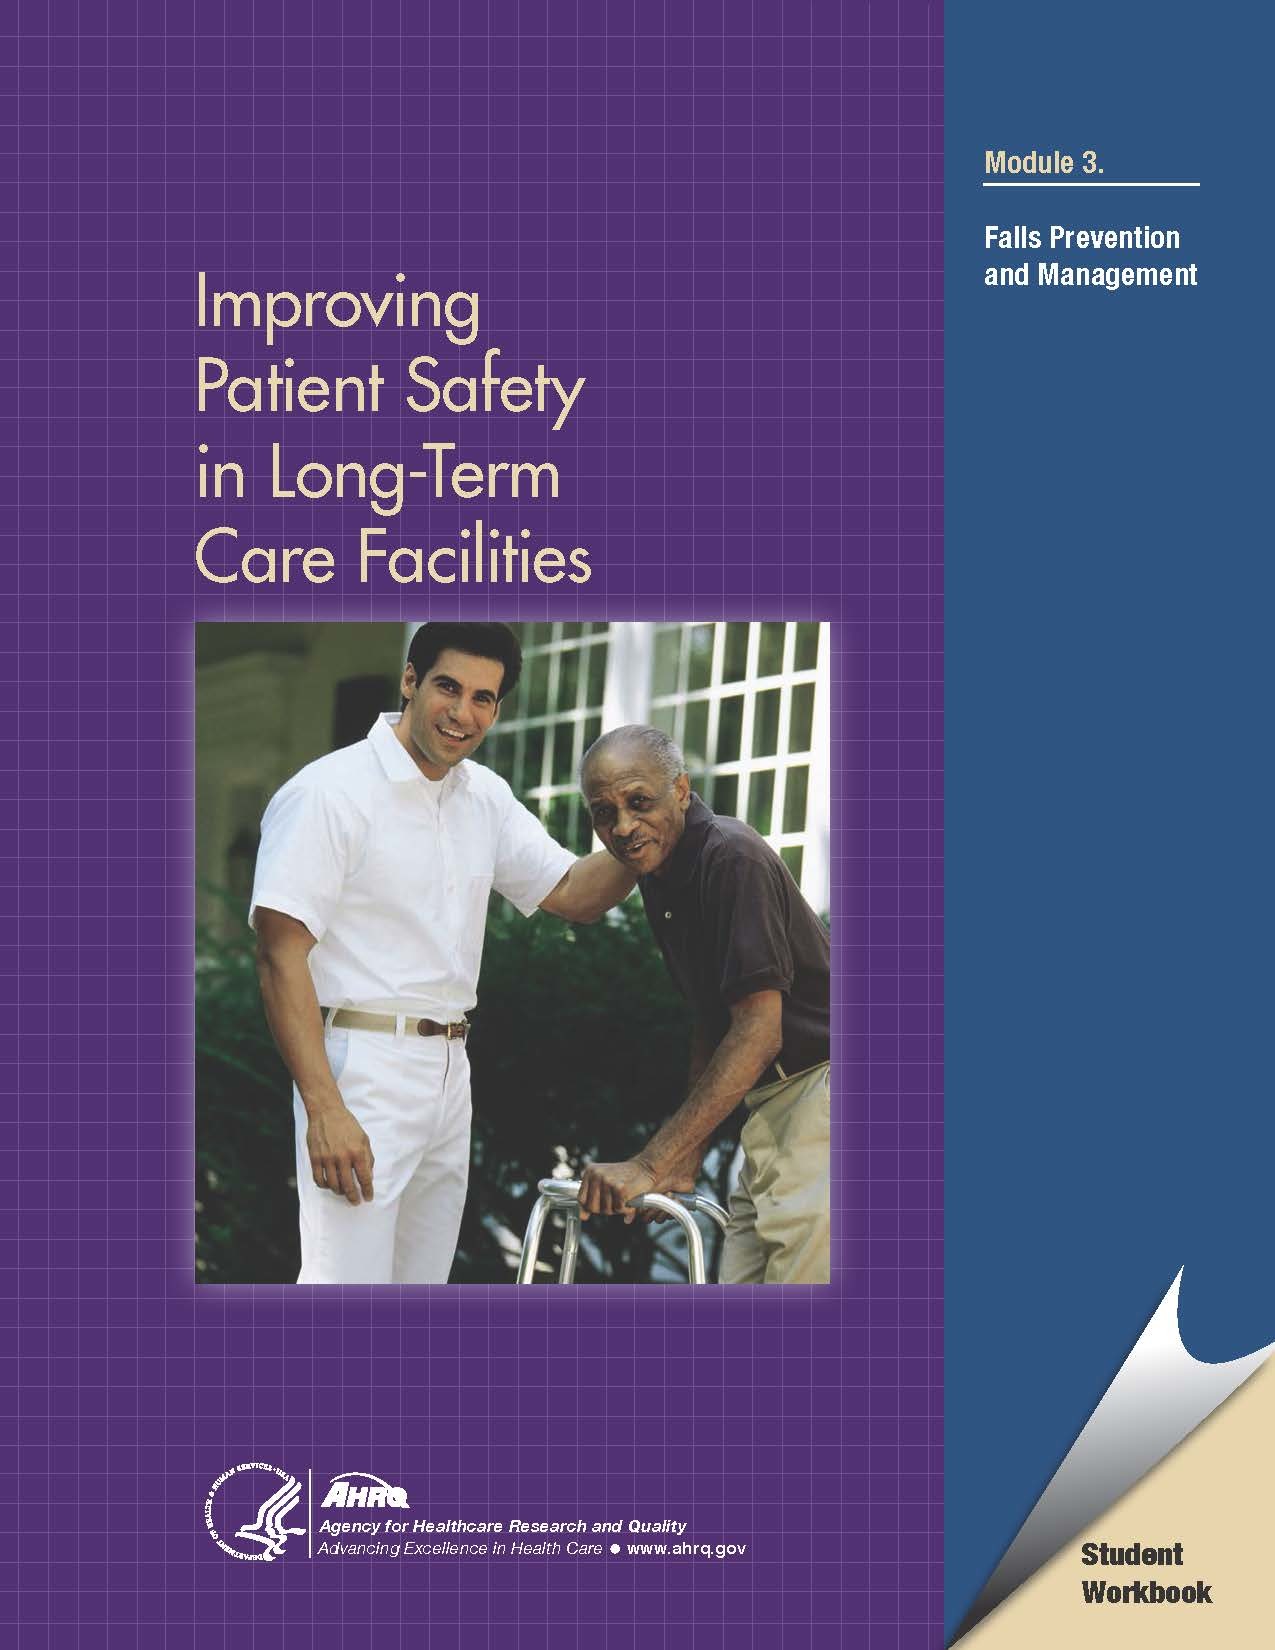 AHRQ_Image_Improving Patient Safety in Long-Term Care Facilities: Falls Prevention and Management